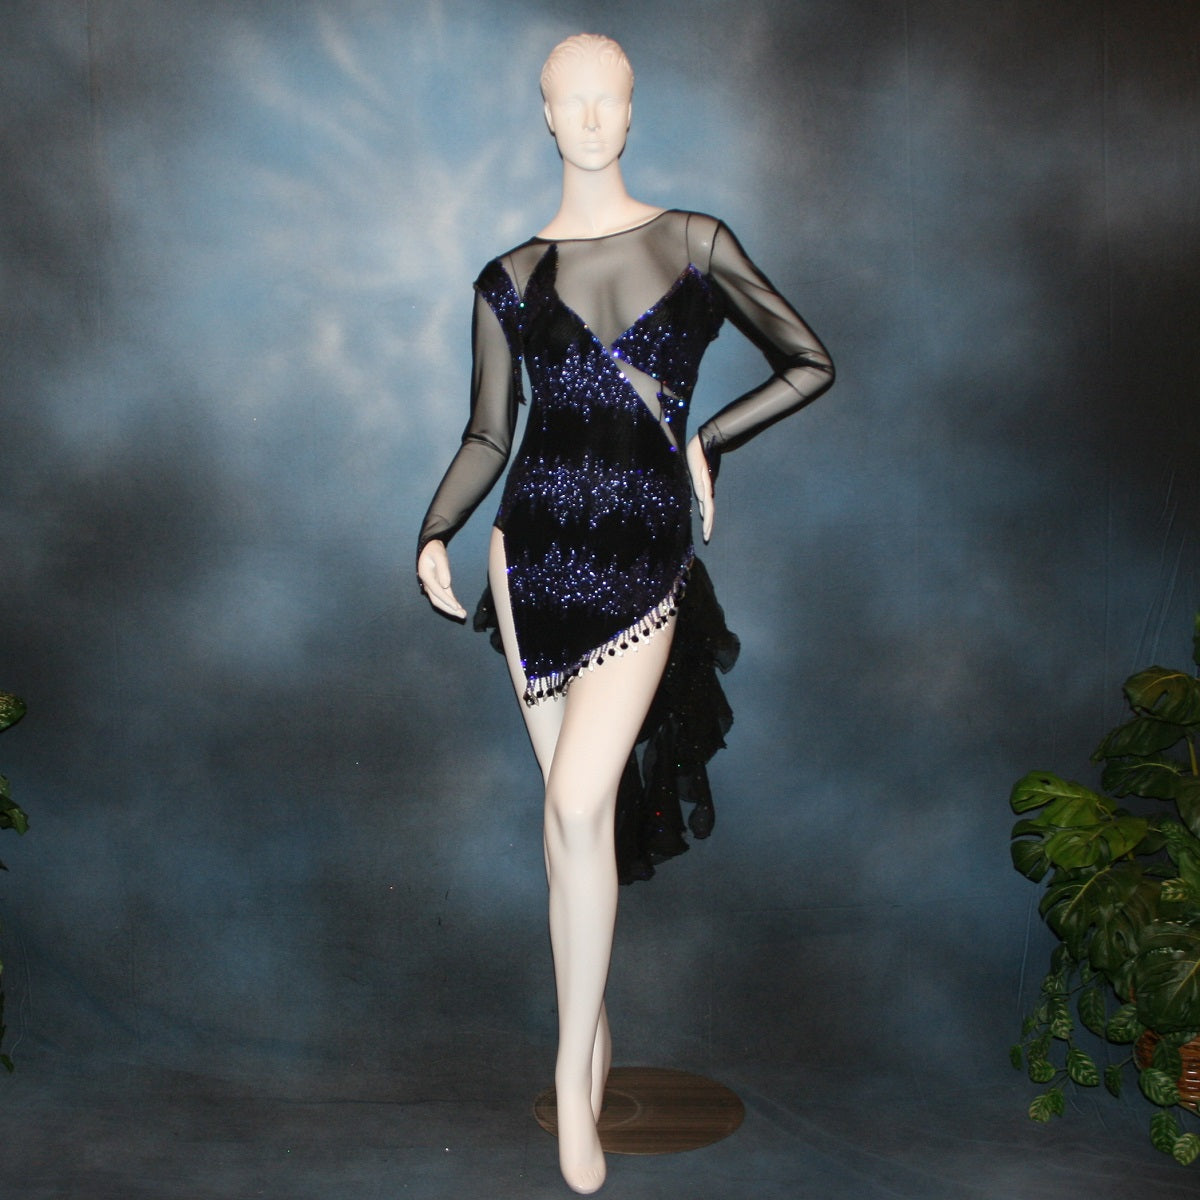 Crystal's Creations Latin/rhythm/tango dress created in black glitter slinky with an awesome electrifying tanzanite/perwinkle glitter pattern artistically placed on a black stretch mesh base, embellished with crystal heliotrope Preciosa rhinestone work, hand beading & features flounces in the back skirting.